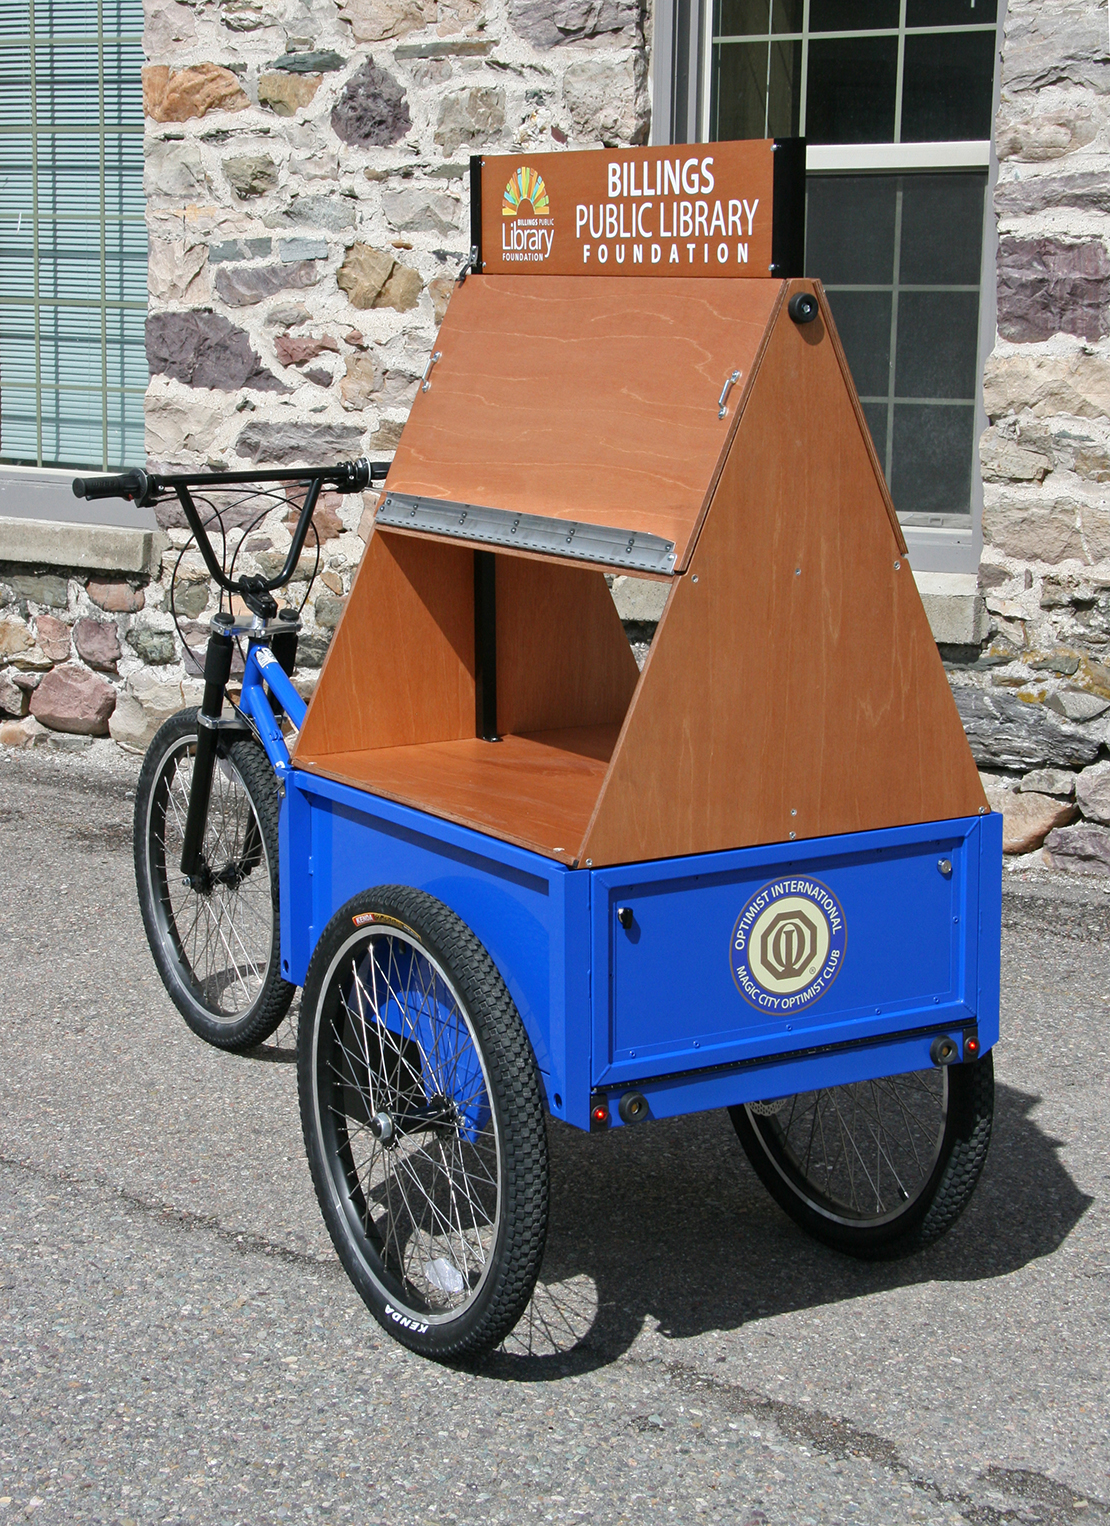 Look for the book bike upon arrival